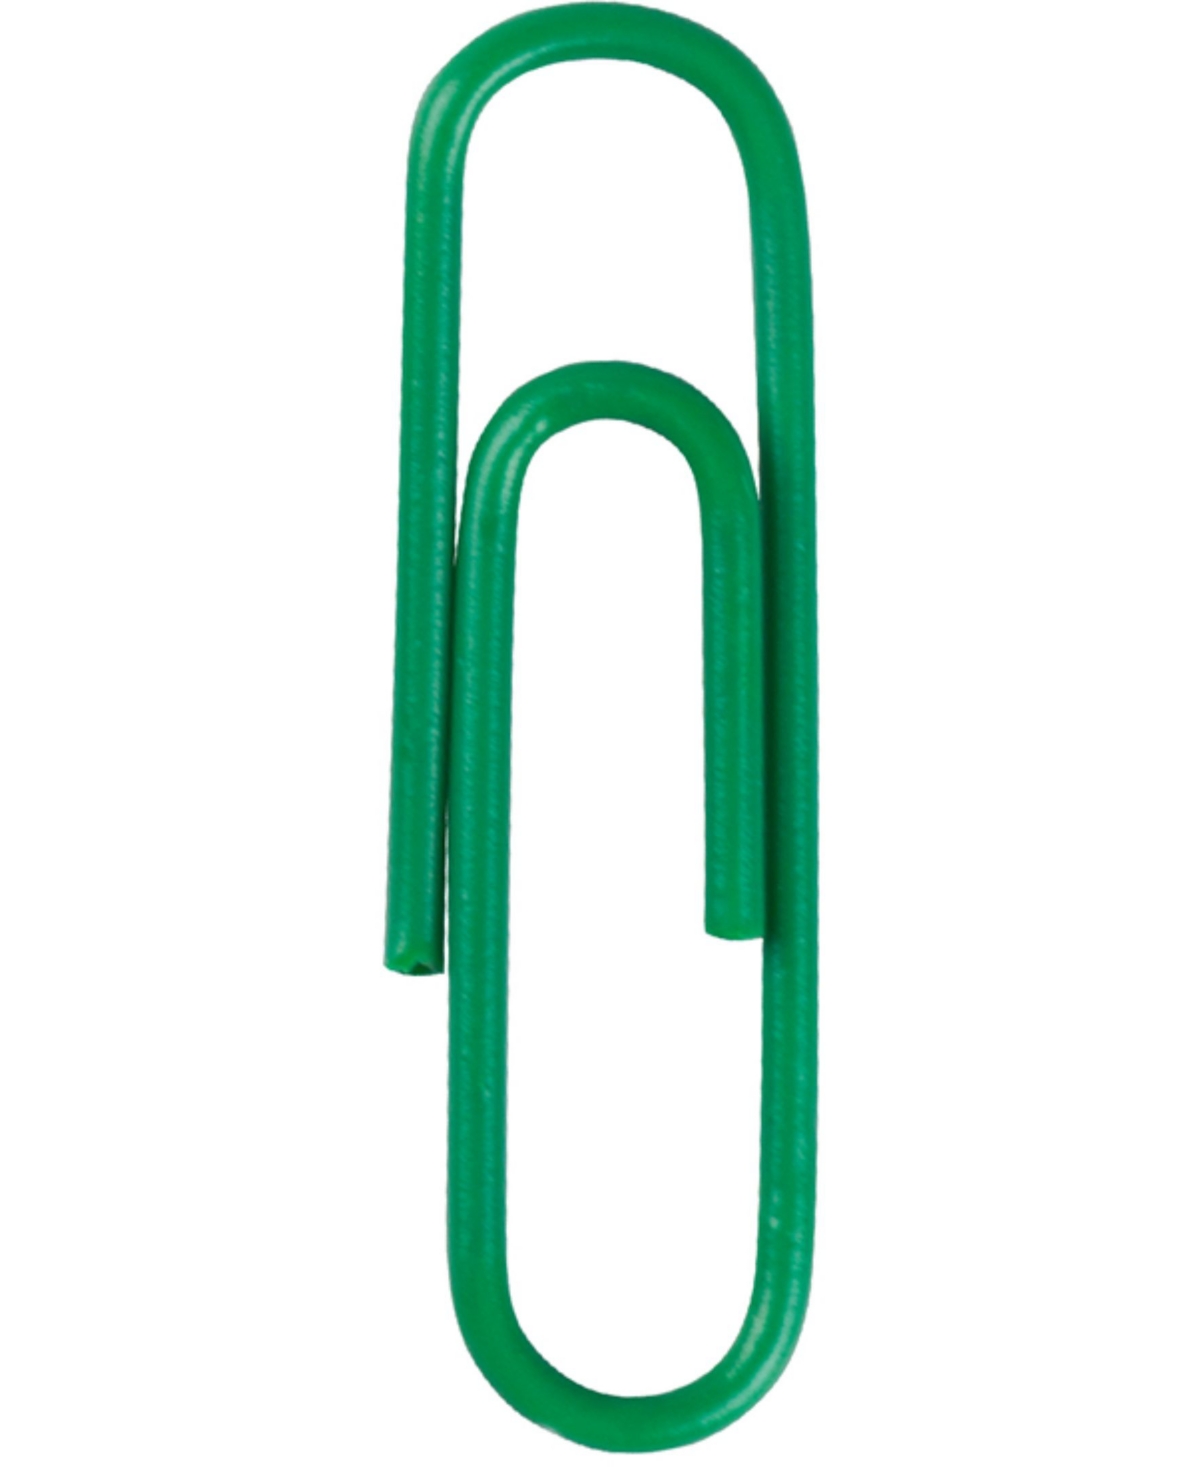 Shop Jam Paper Colorful Standard Paper Clips In Green